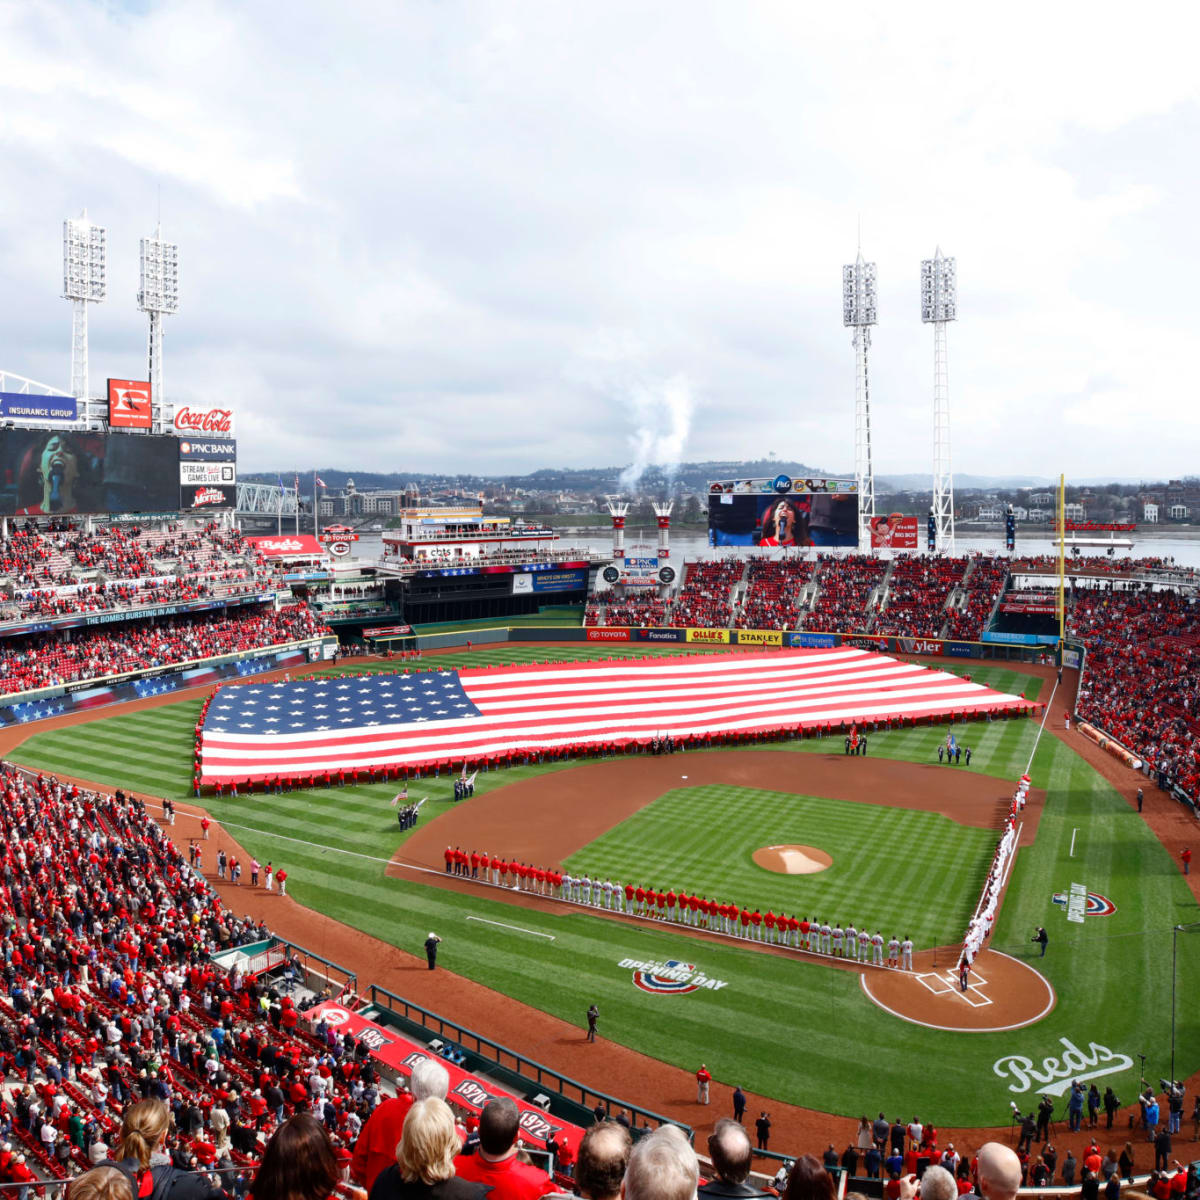 Social media reactions: Opening Day at home for MLB, Cincinnati Reds